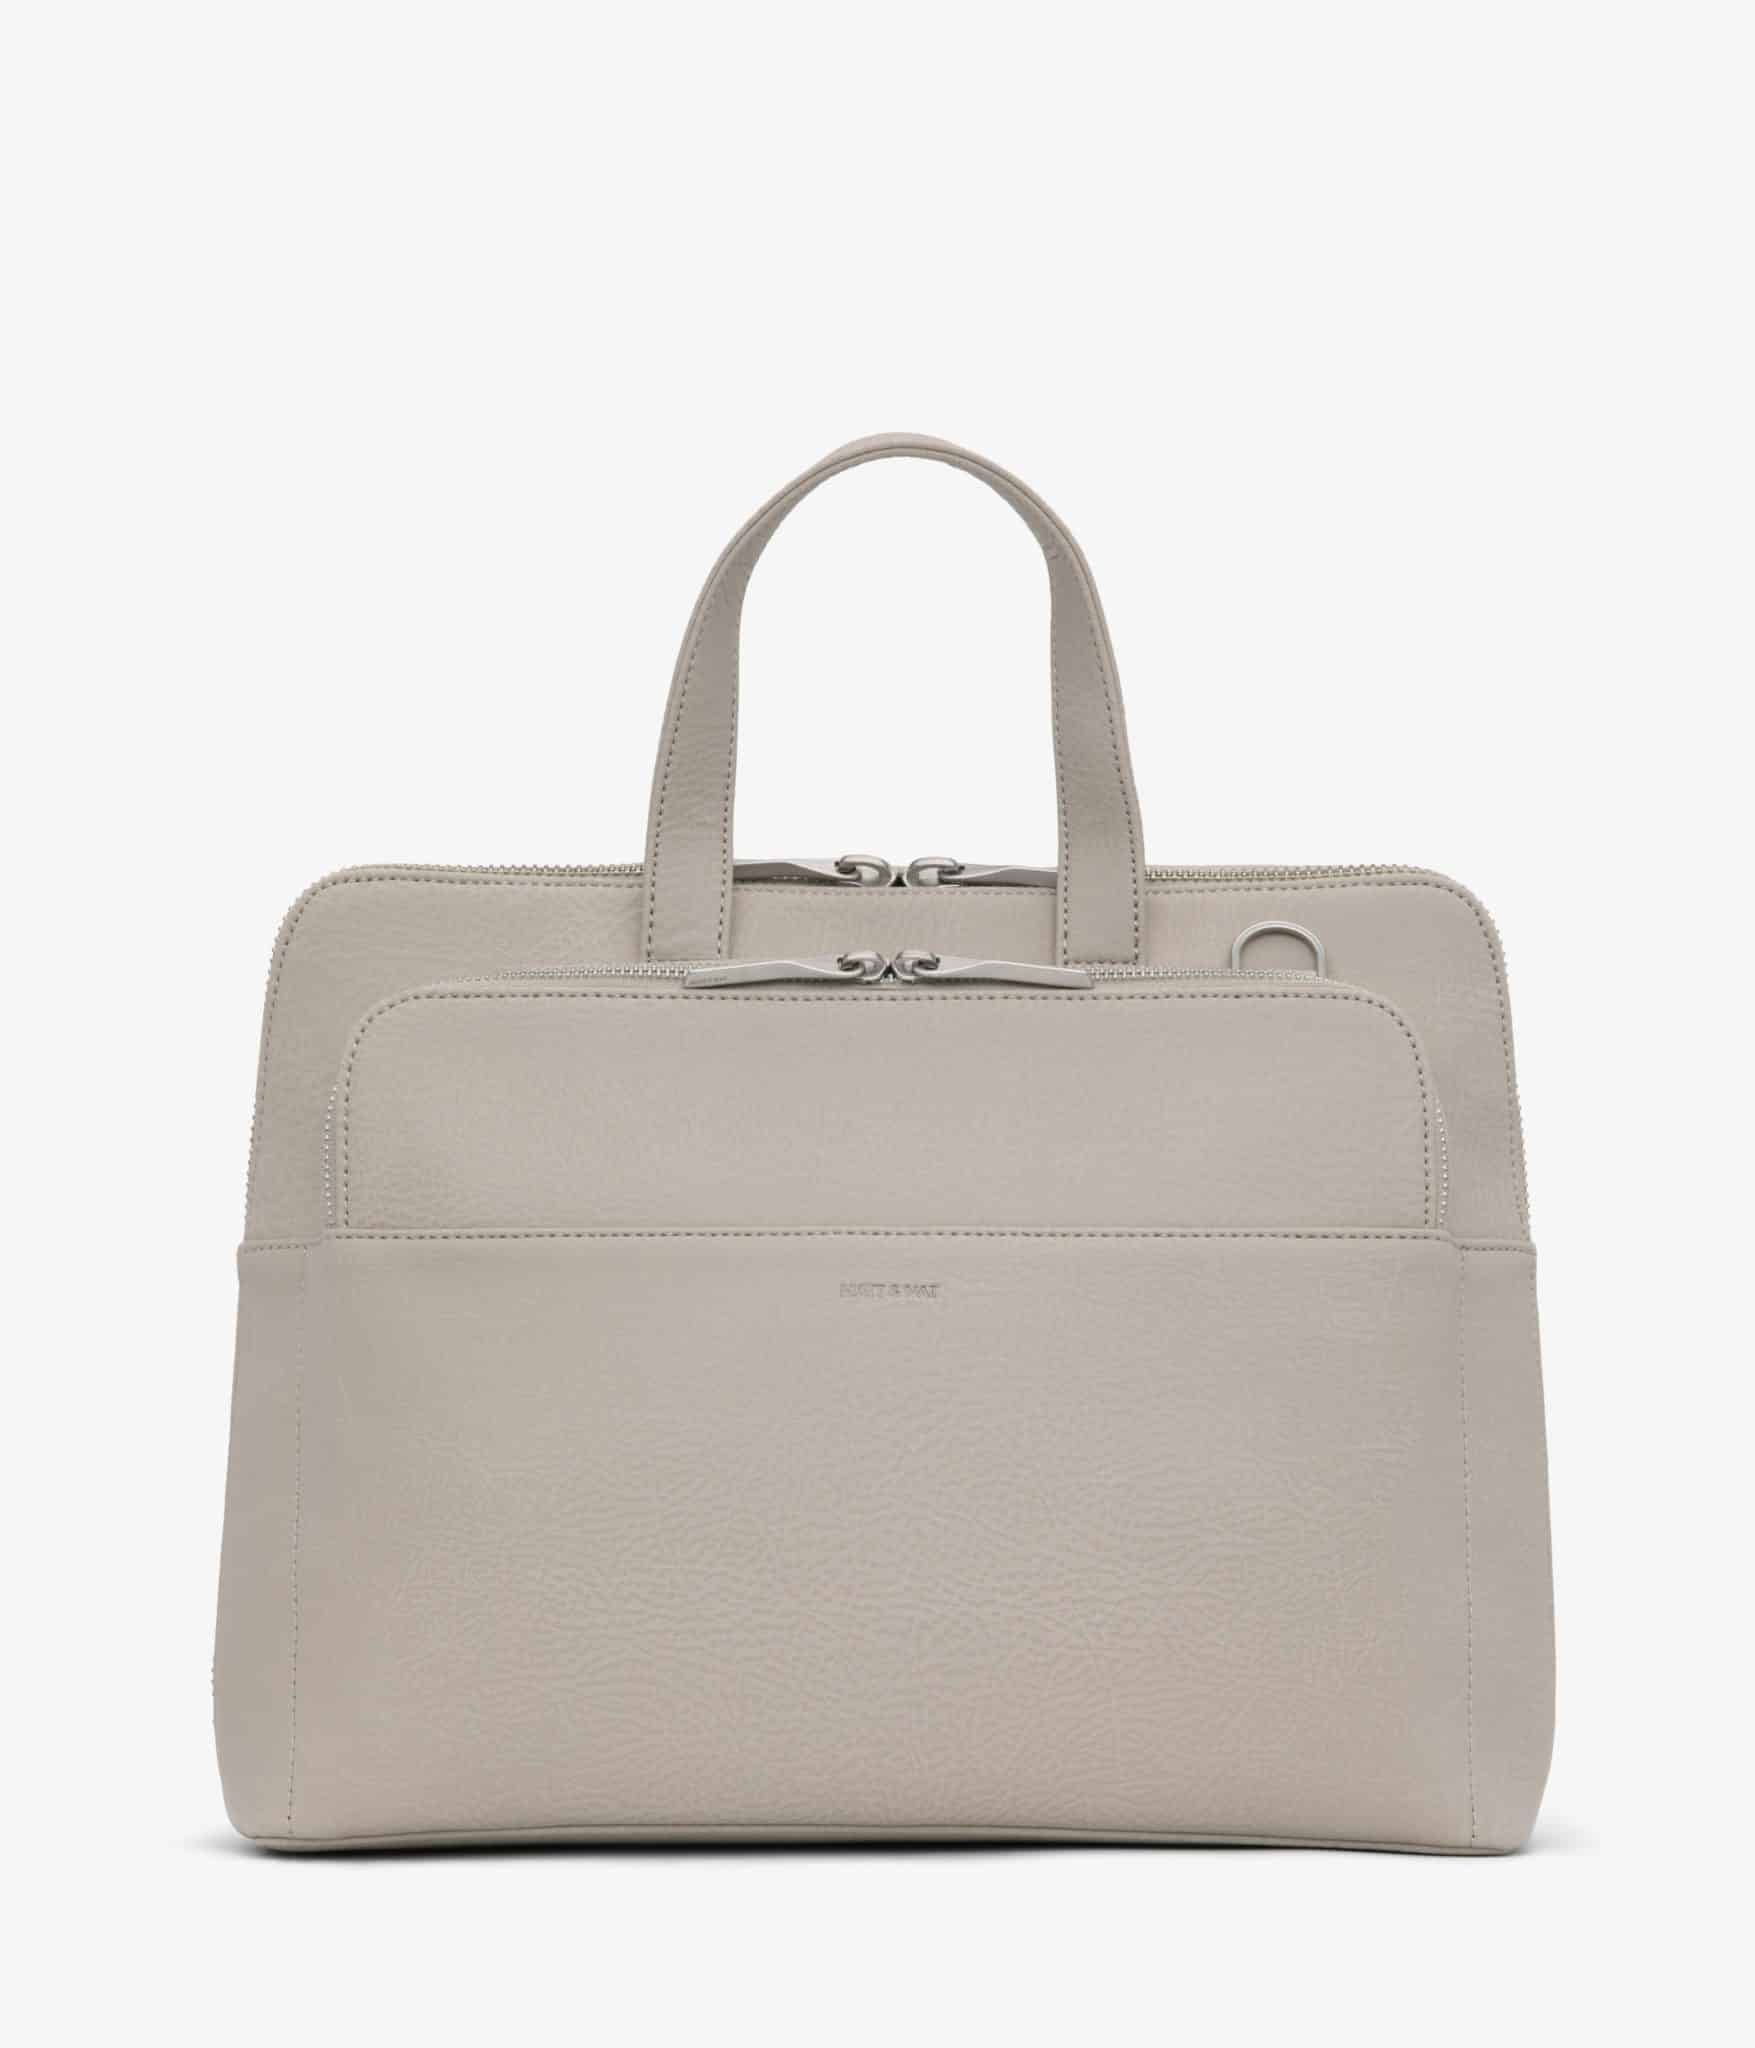 Vegan Handbag Dupes for the Most Iconic Bags